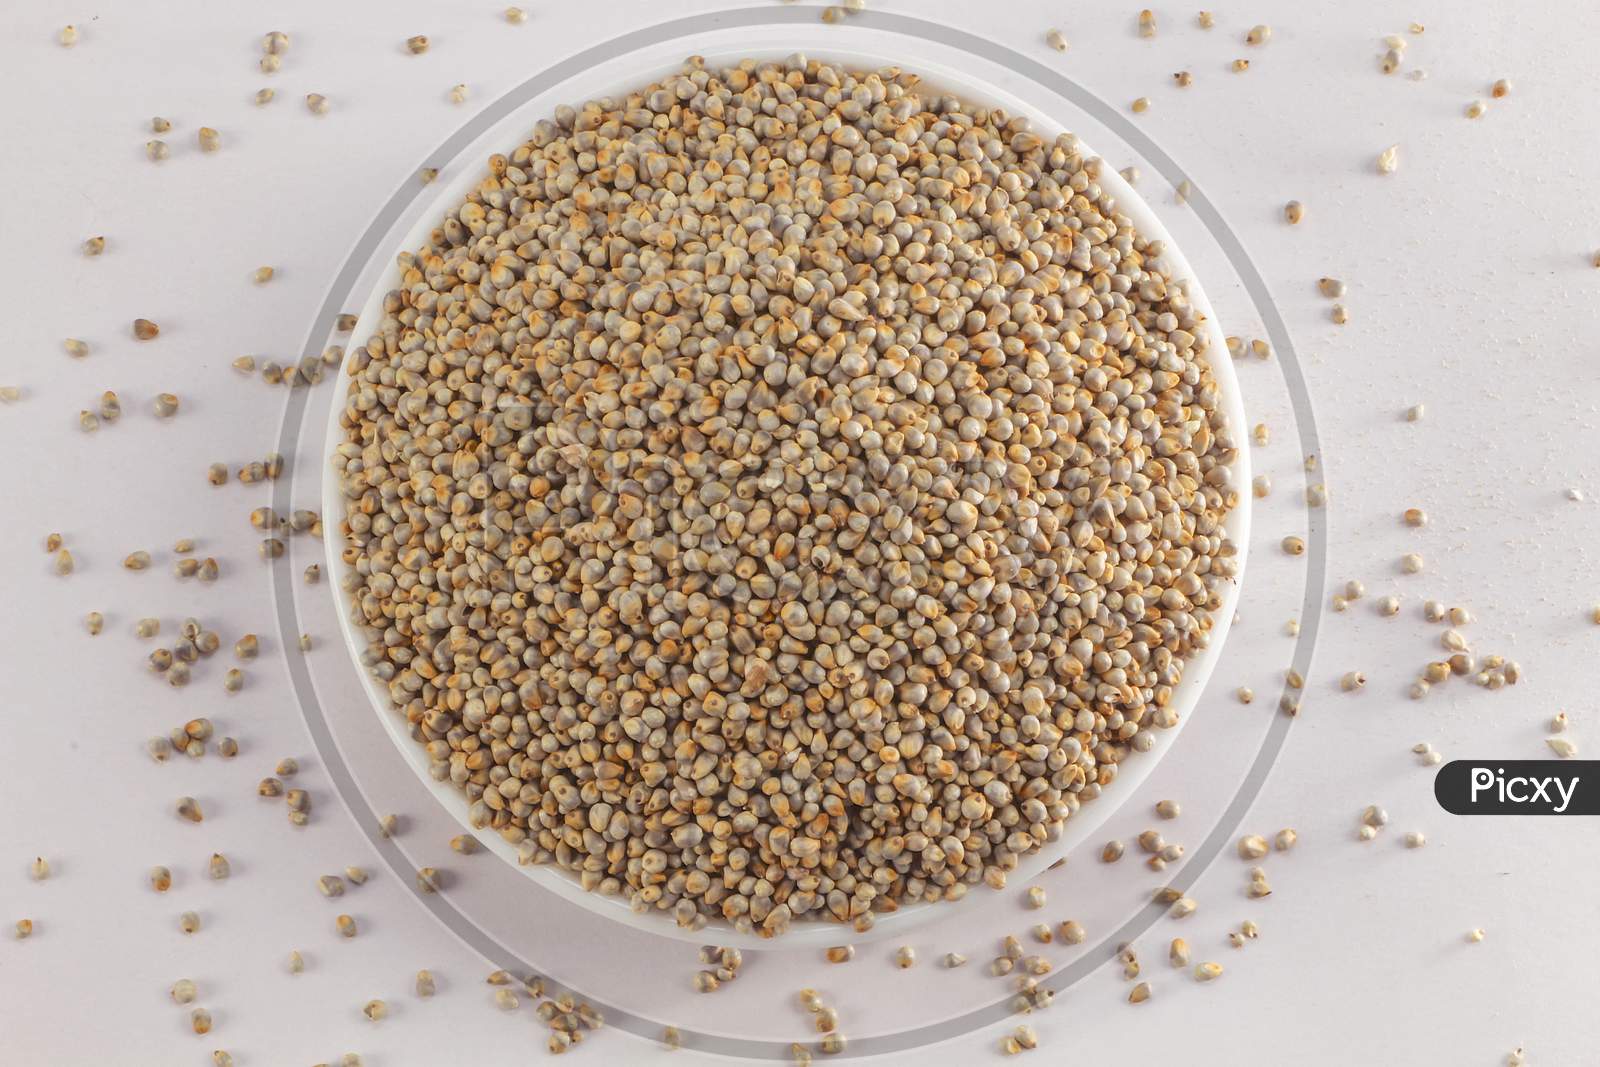 Bowl in white Background containing Pearl Millets